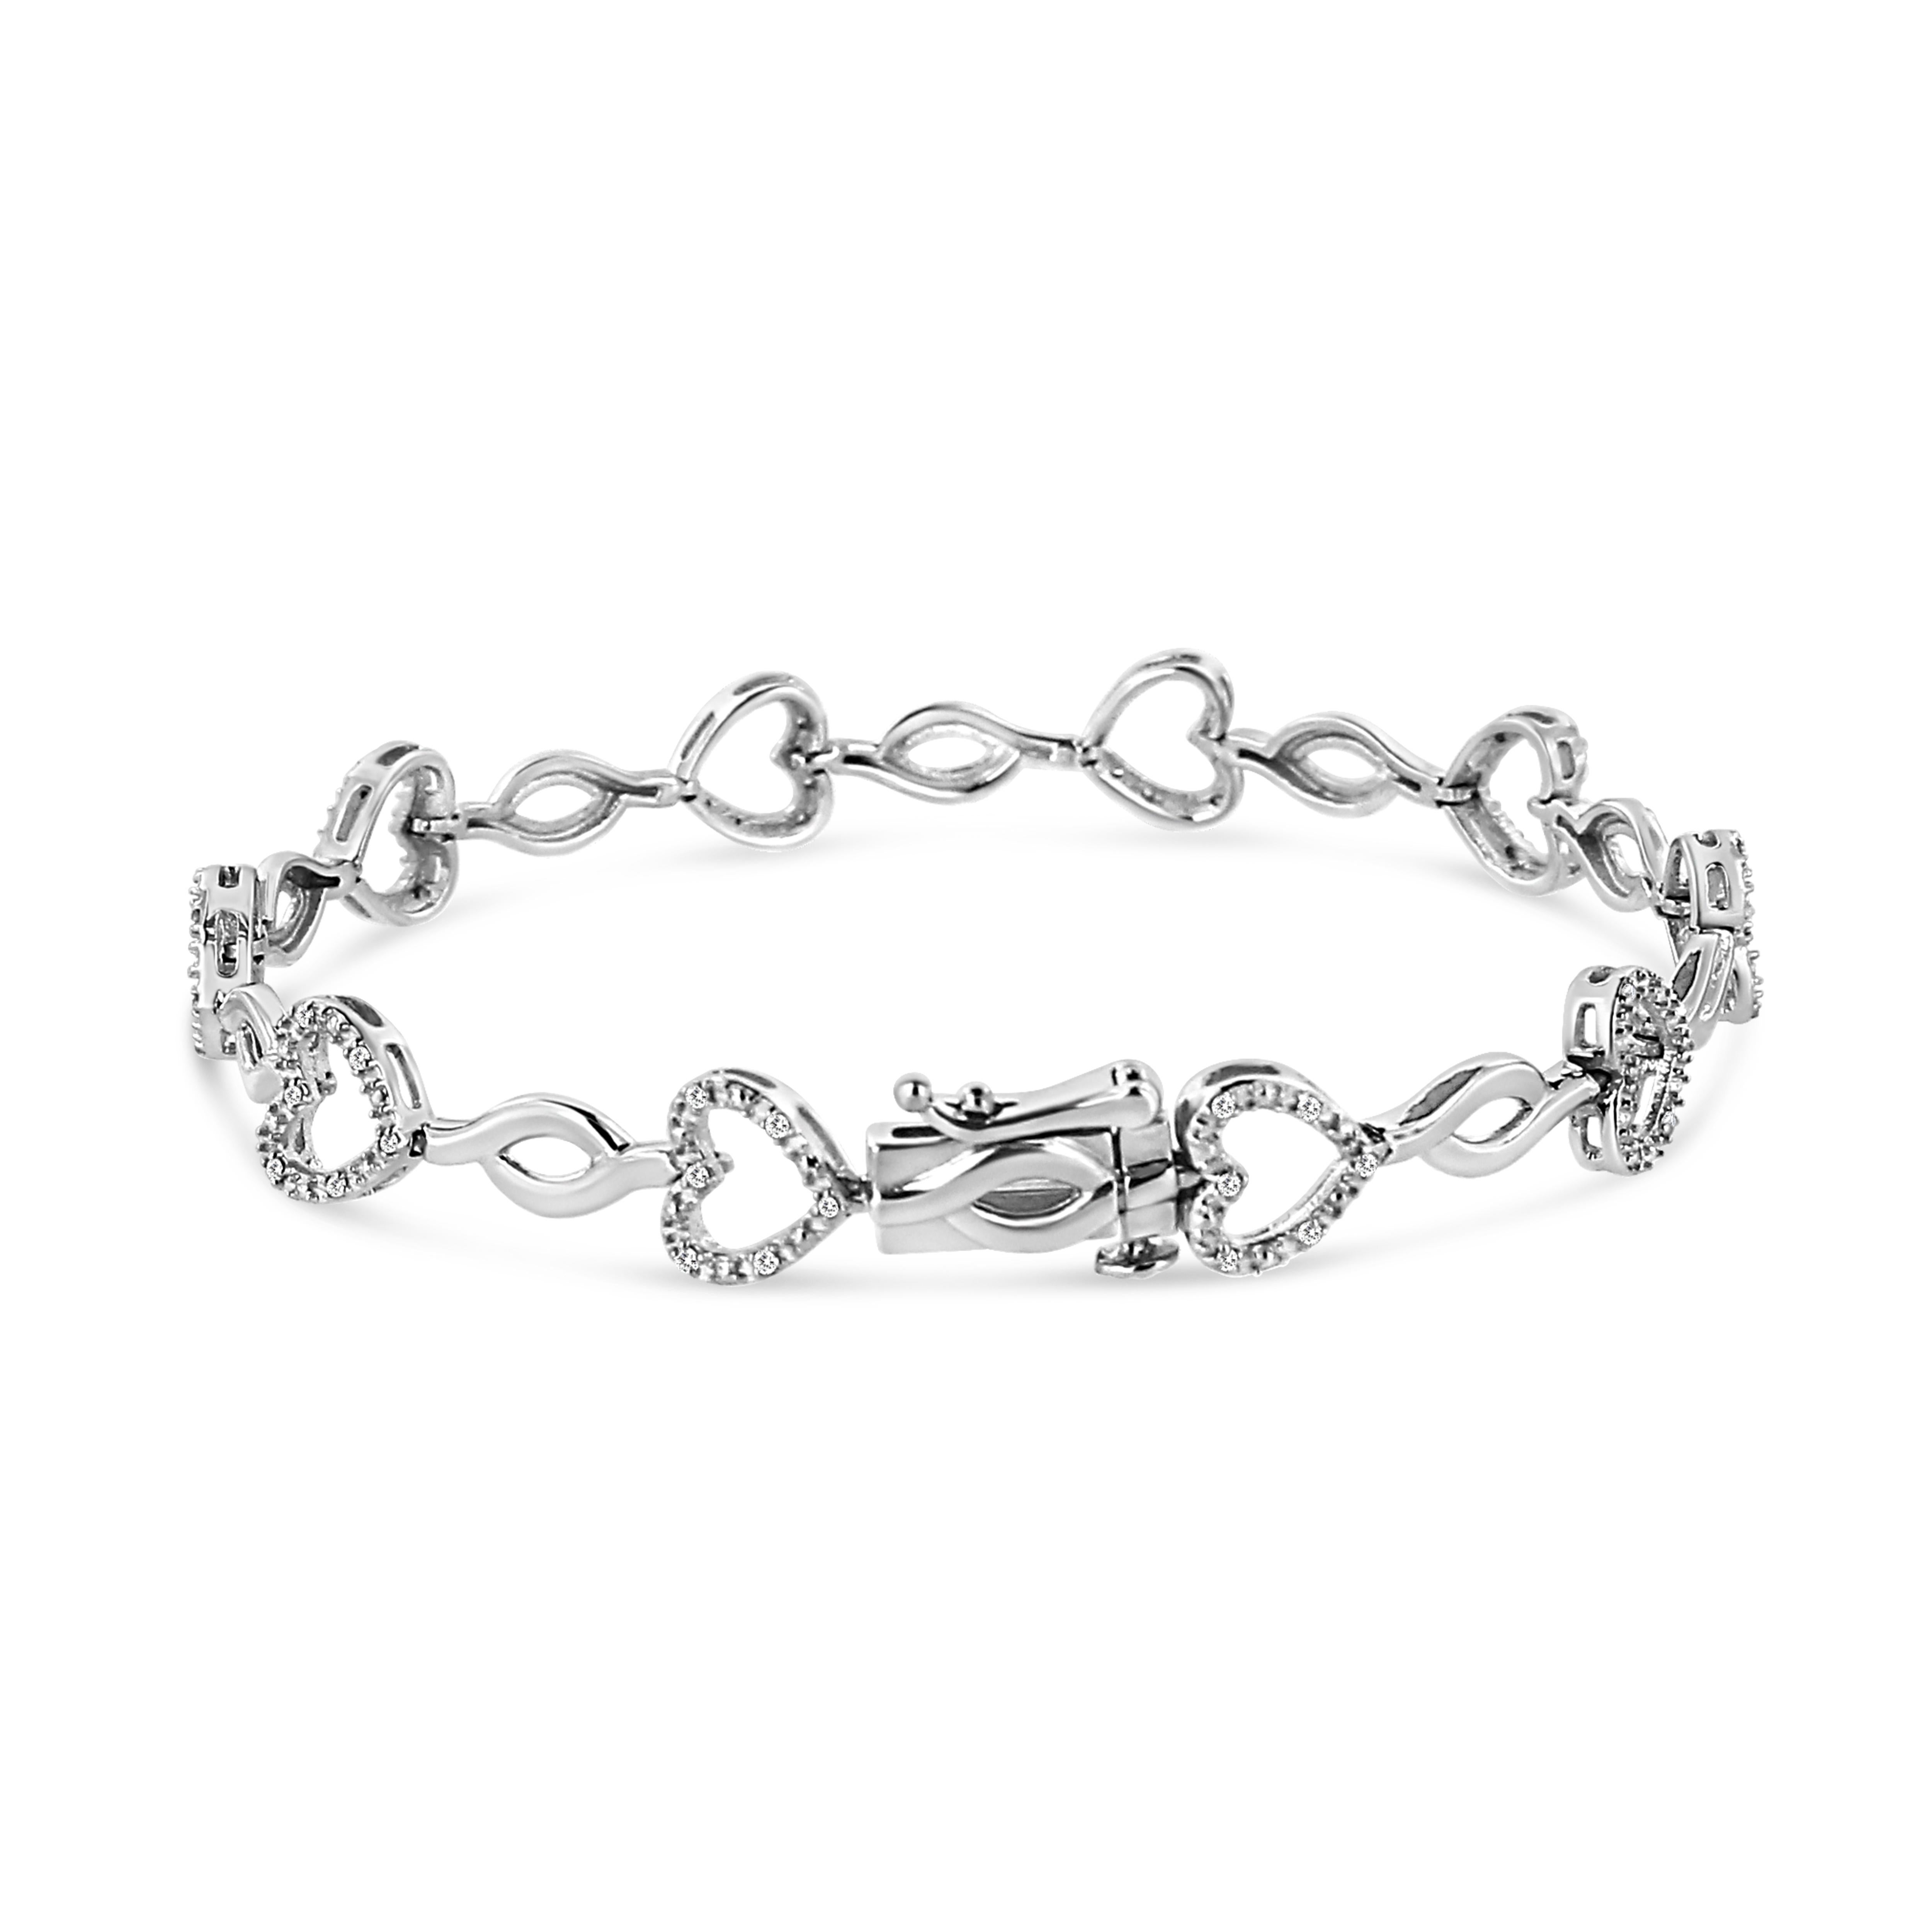 Shine bright this season with this trendy silver bracelet with elegant heart and infinity links. This piece is crafted in the finest .925 sterling silver, plated with rhodium (a platinum-family metal) for a lifetime of tarnish-free wear. The